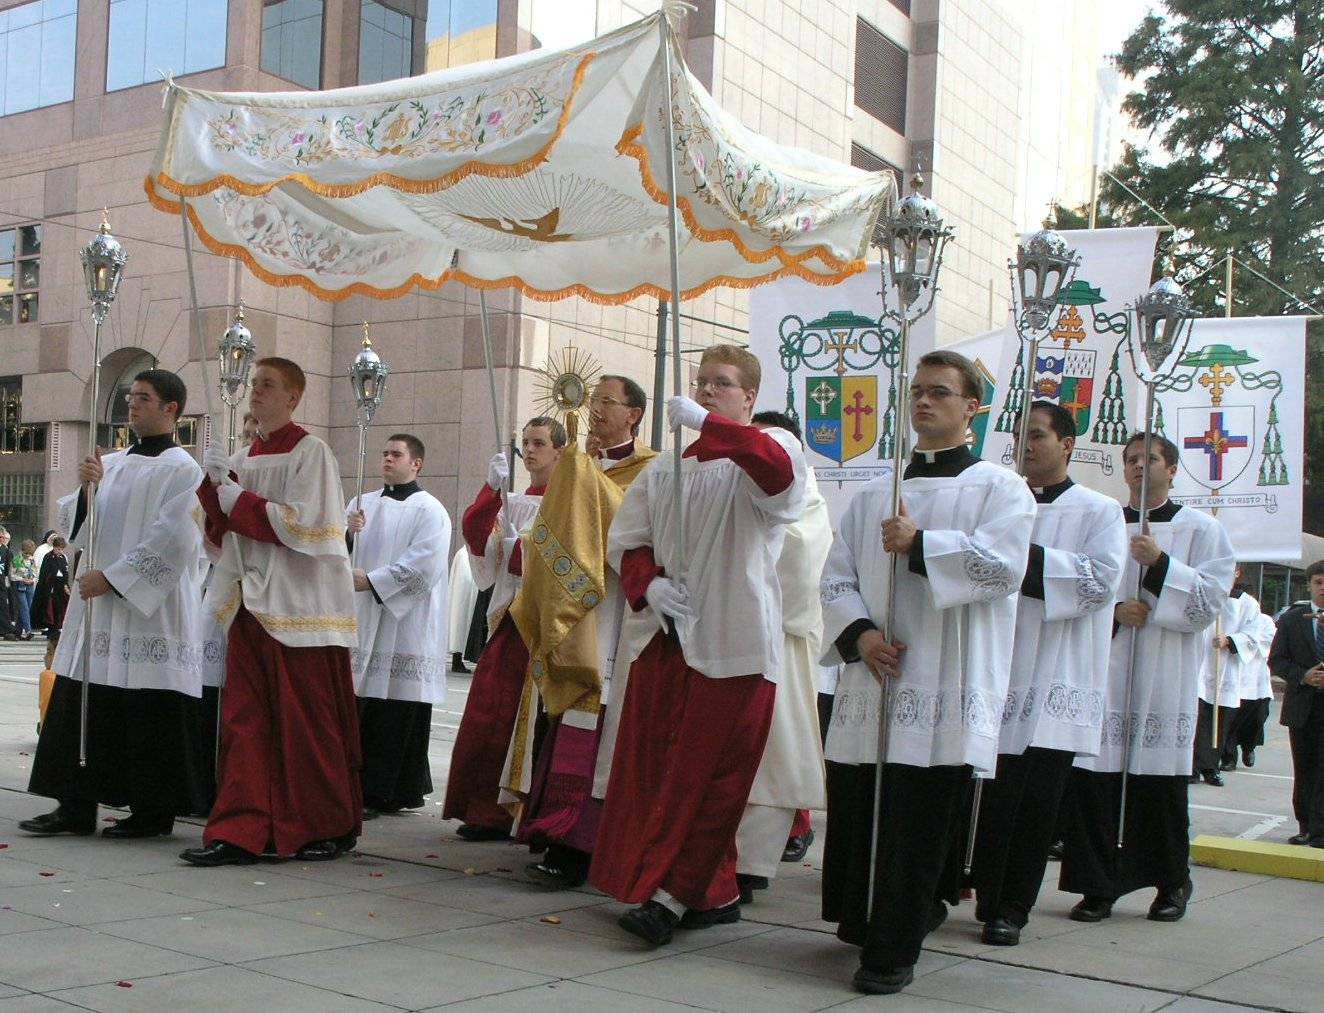 Blessed_Sacrament_procession,_First_Annual_Southeastern_Eucharistic_Congress,_Charlotte,_North...jpg